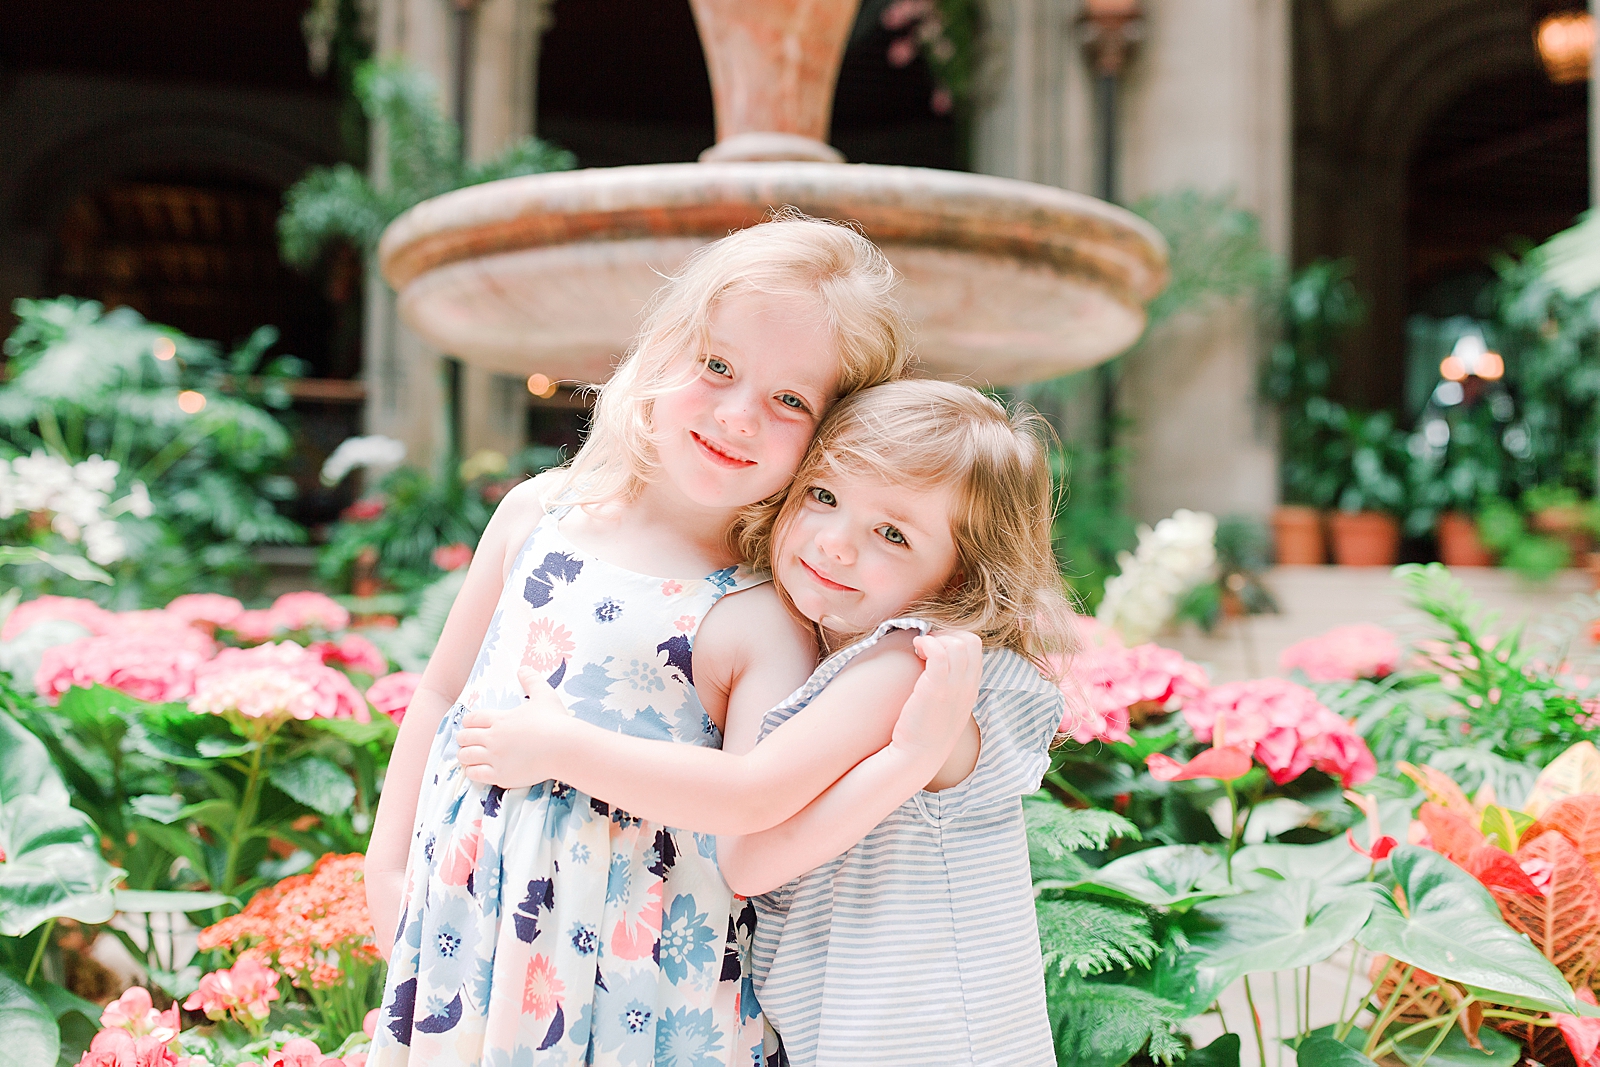 Biltmore House and Gardens Sisters hugging in the winter garden Photo